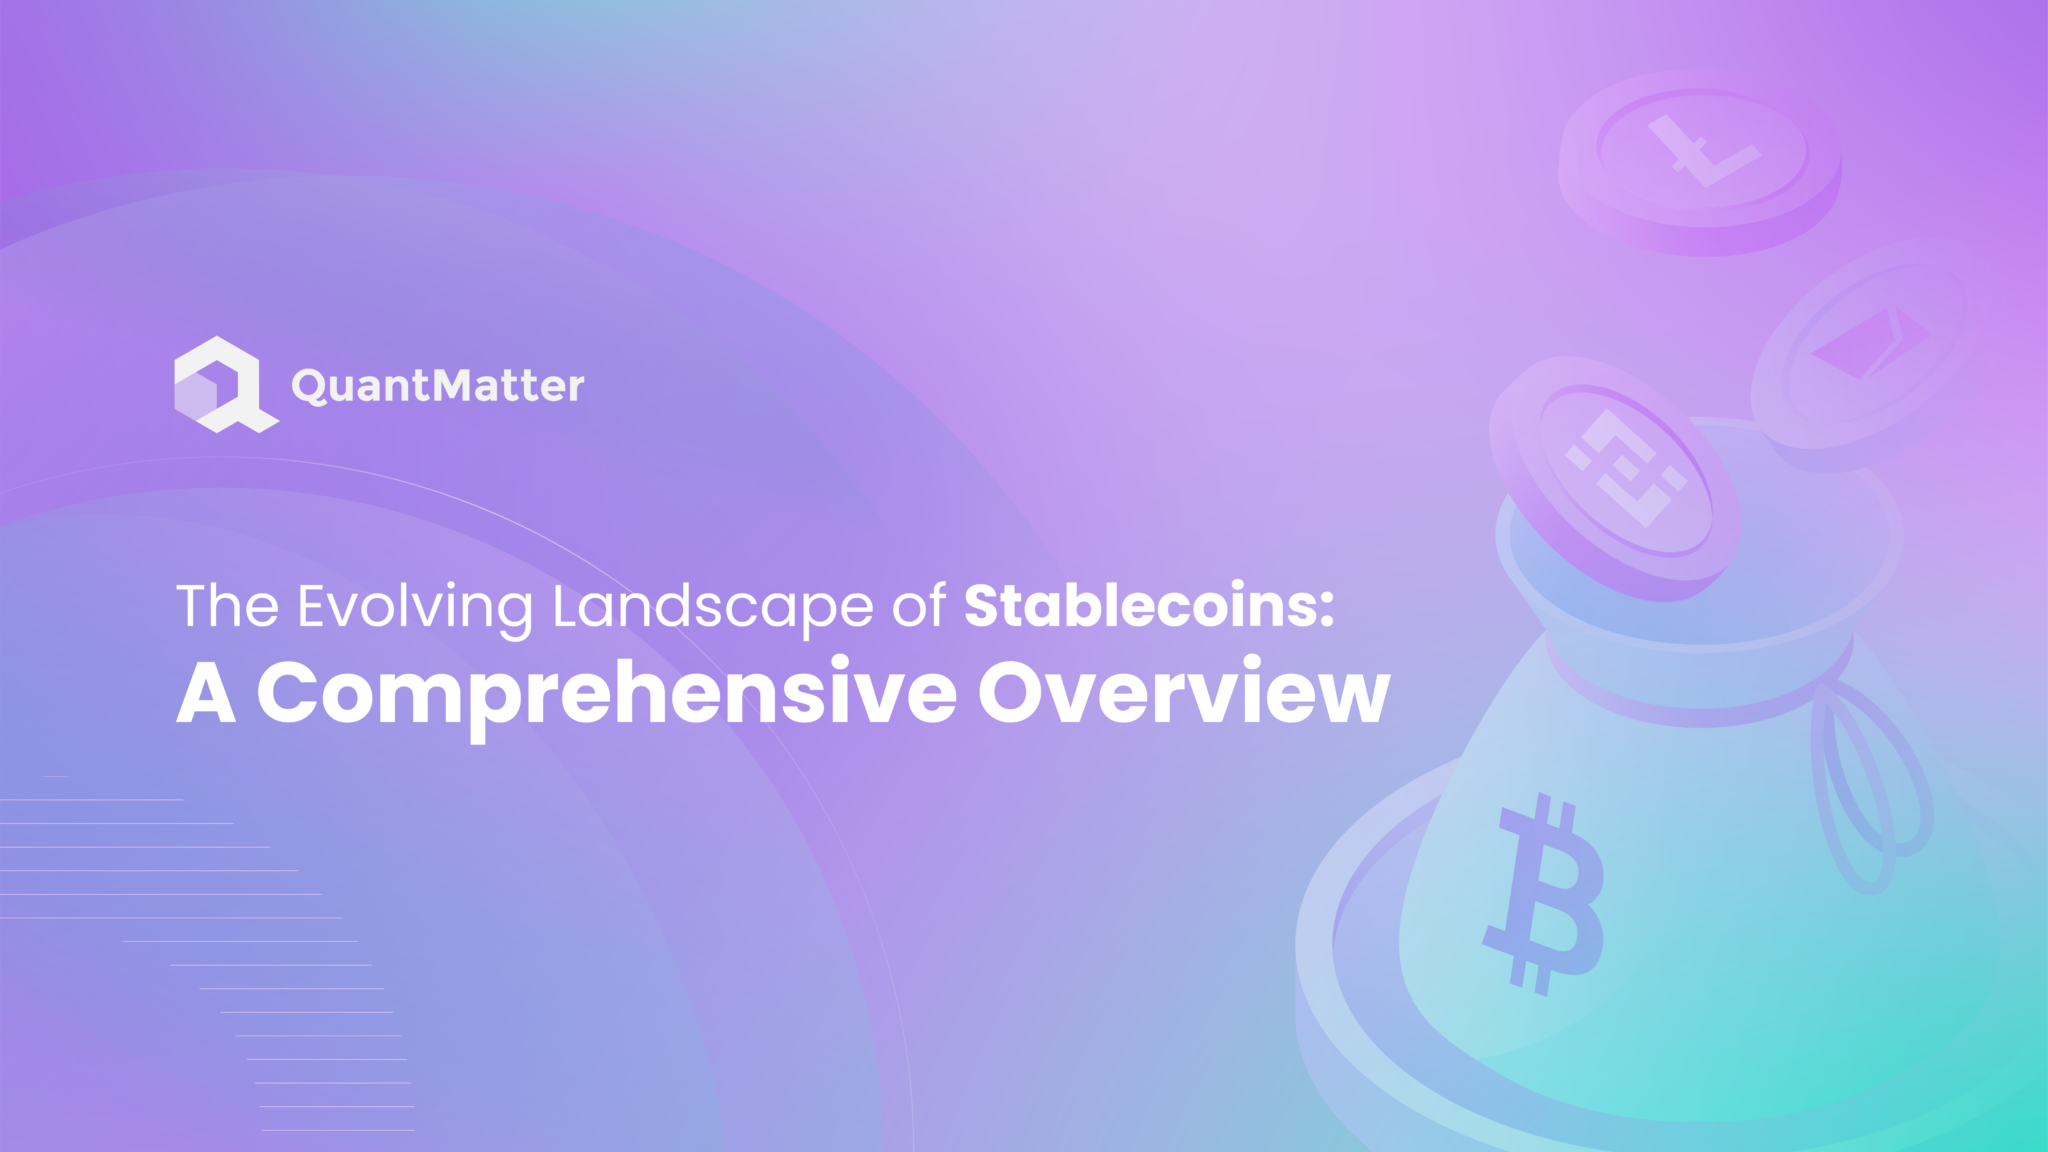 What Are The Future Outlook of Stablecoins? Find Out Here!